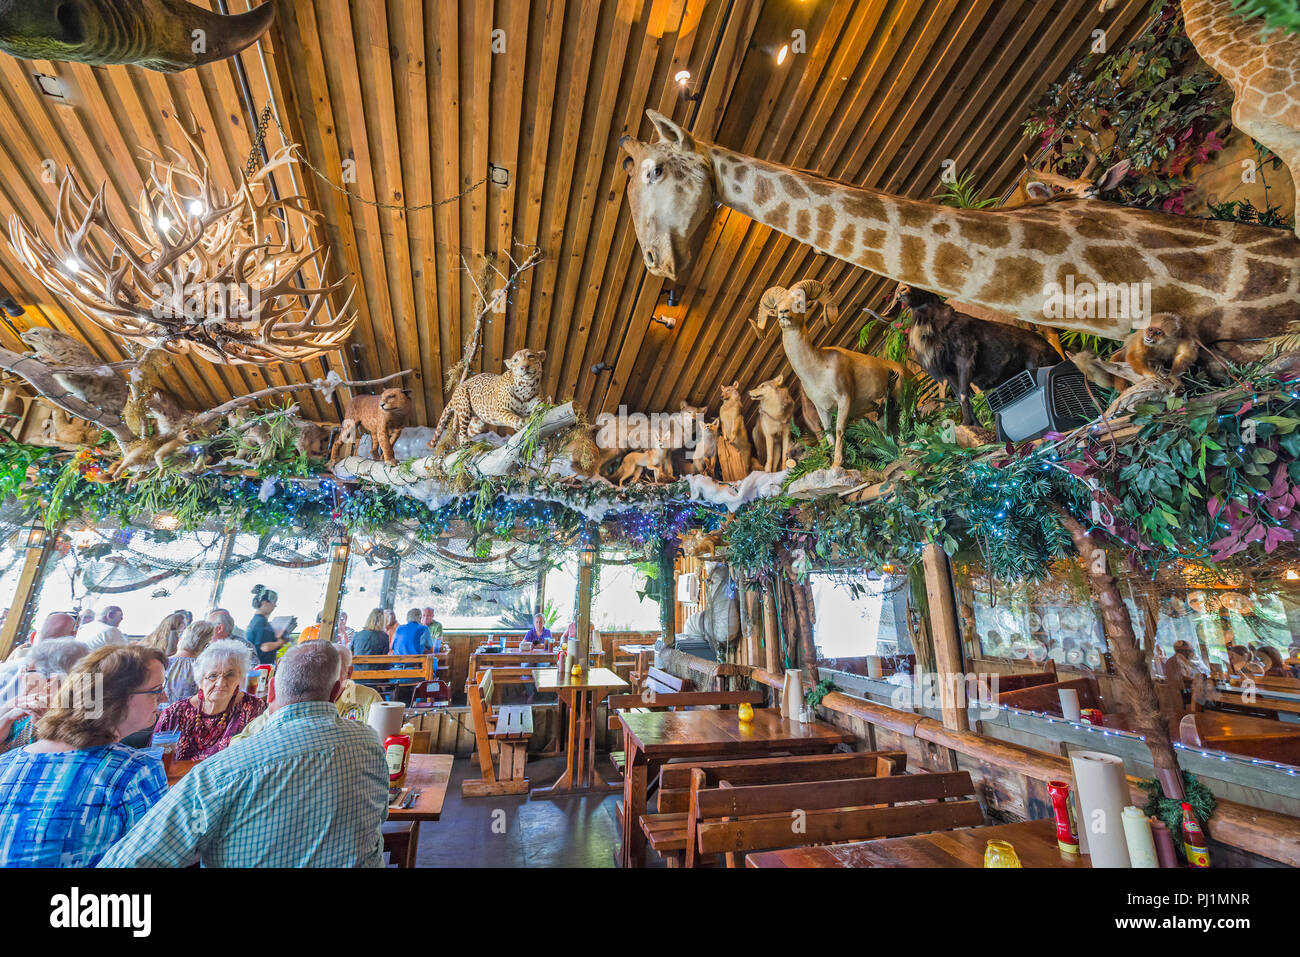 Clarks Fish Camp is a unique and rustic seafood restaurant located on  Julington Creek, a tributary of the St. Johns River in Jacksonville,  Florida Stock Photo - Alamy